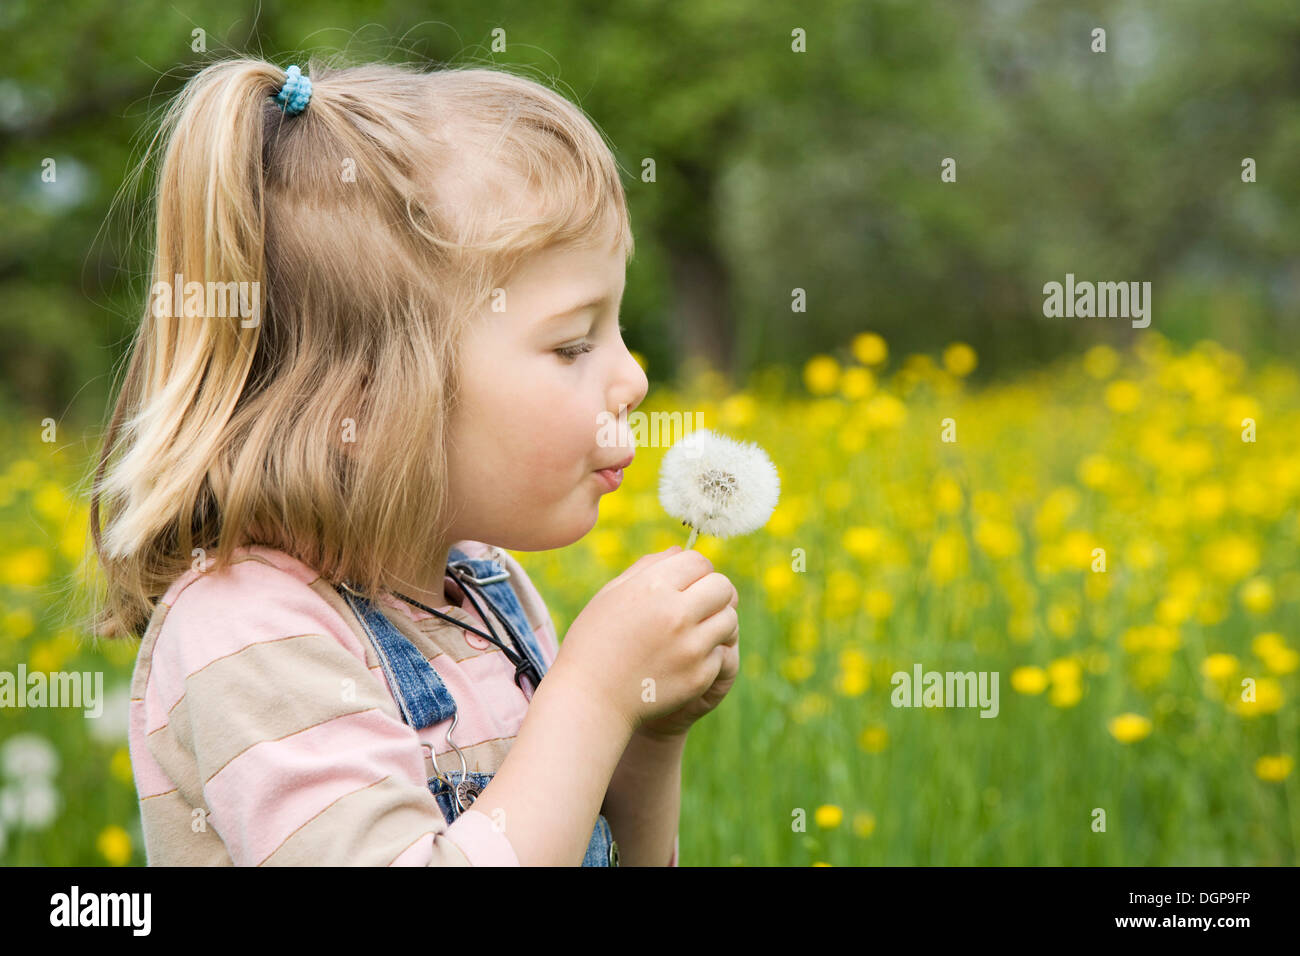 Girl sitting on a meadow holding a dandelion clock, portrait Stock Photo